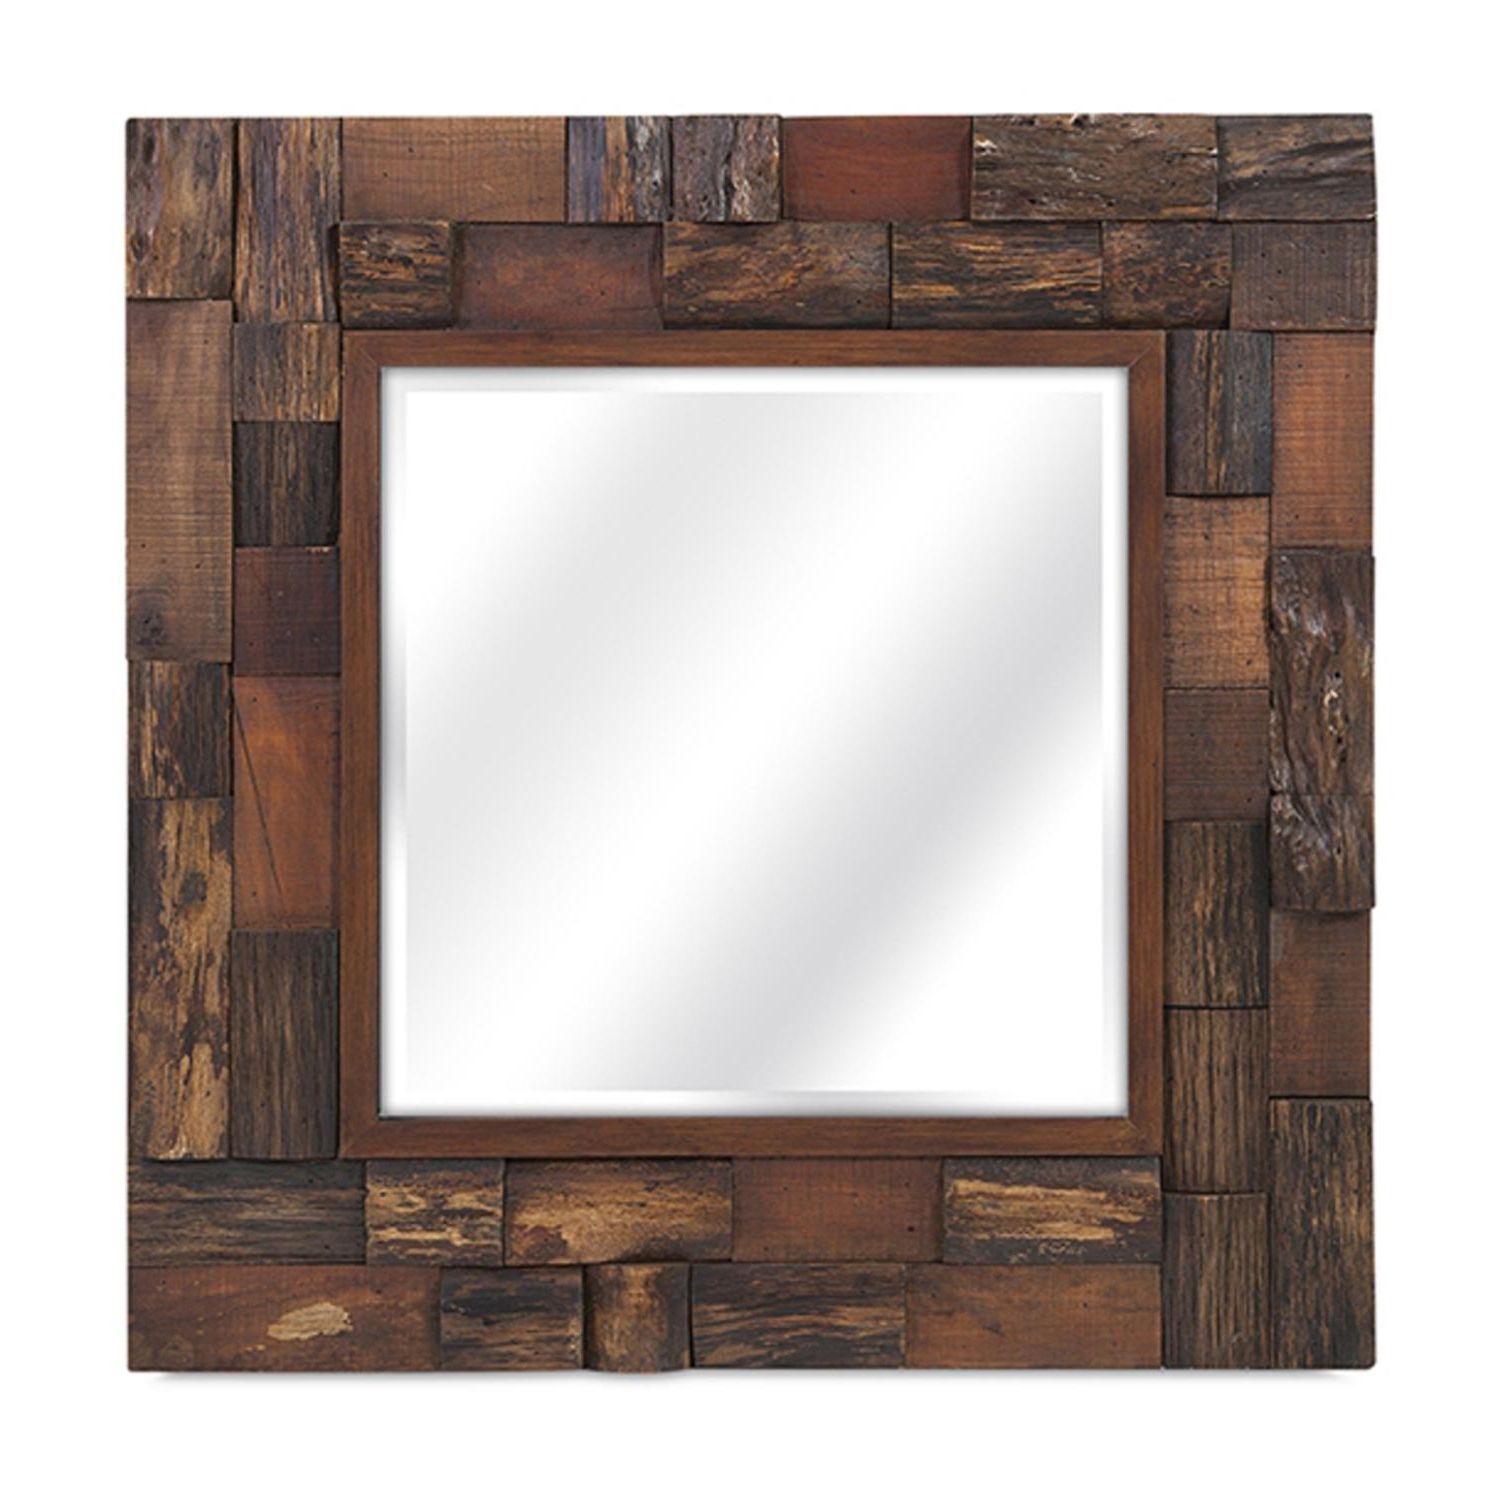 Rustic Getaway Wood Wall Mirrors Pertaining To Most Up To Date 30" Rustic Masculine Baker Wood Finish Slat Square Beveled Wall Mirror (View 3 of 15)